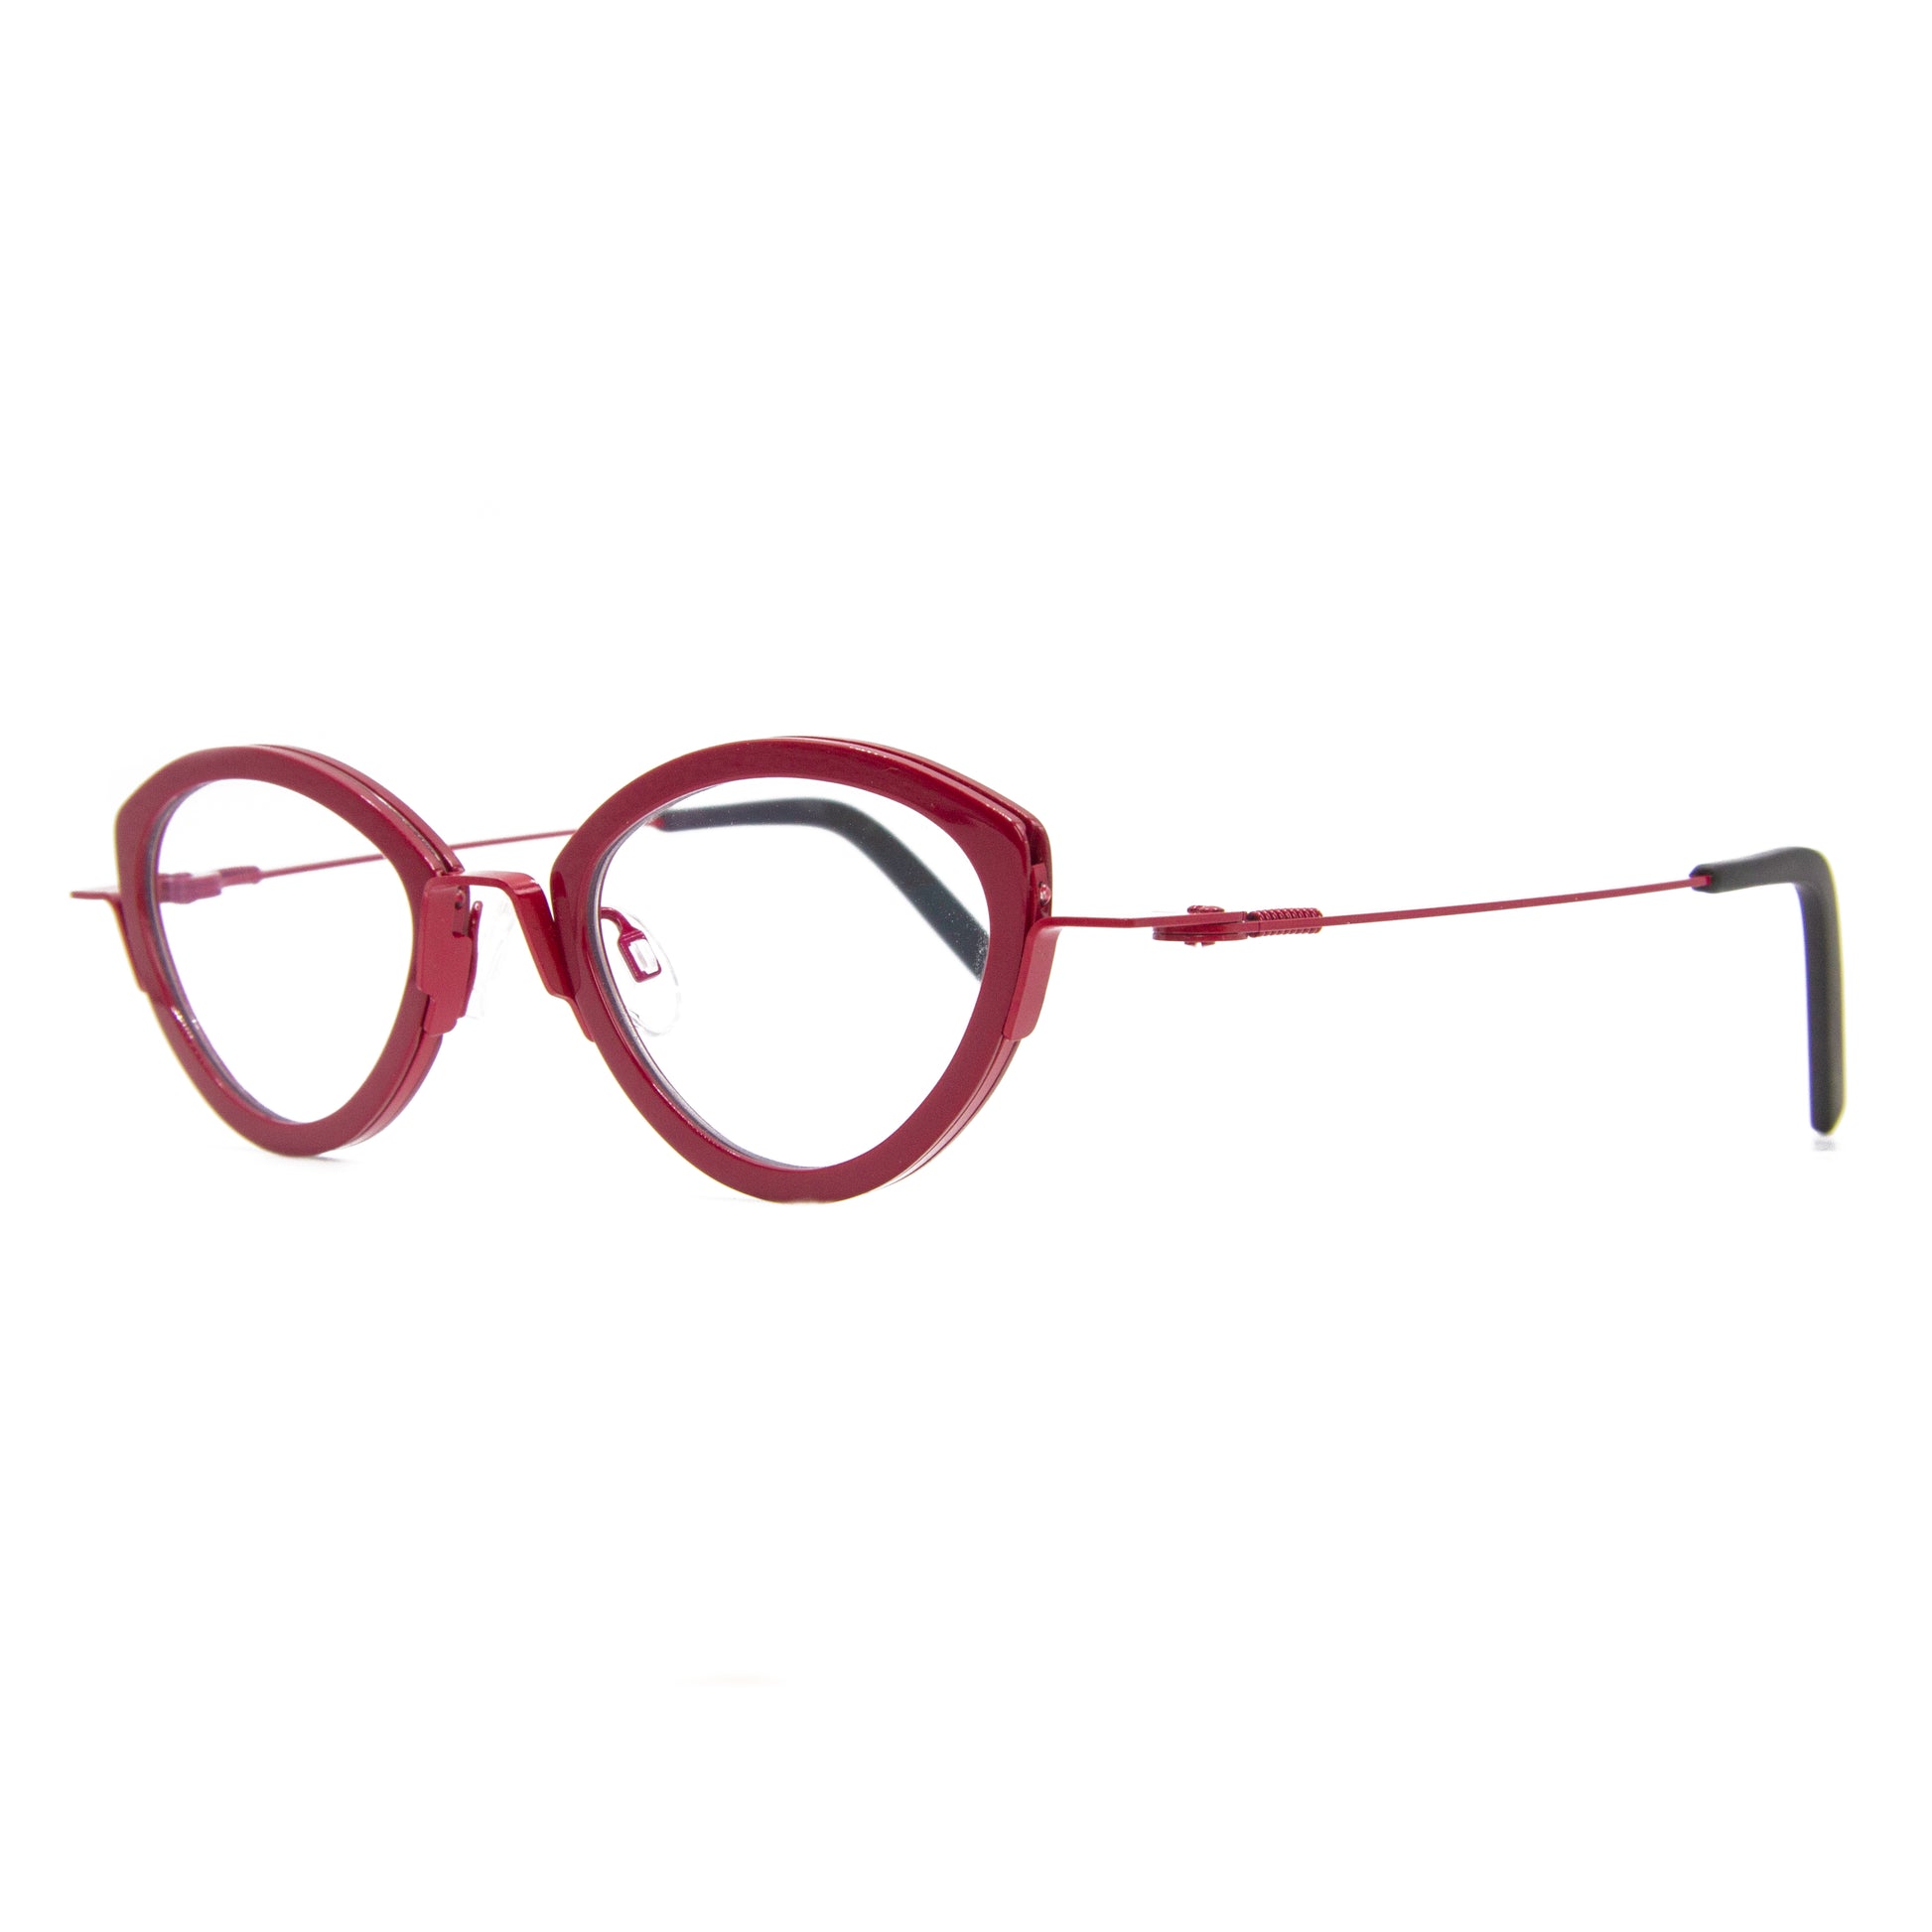 Theo - Eyewear - Sprouts - 48 - Side